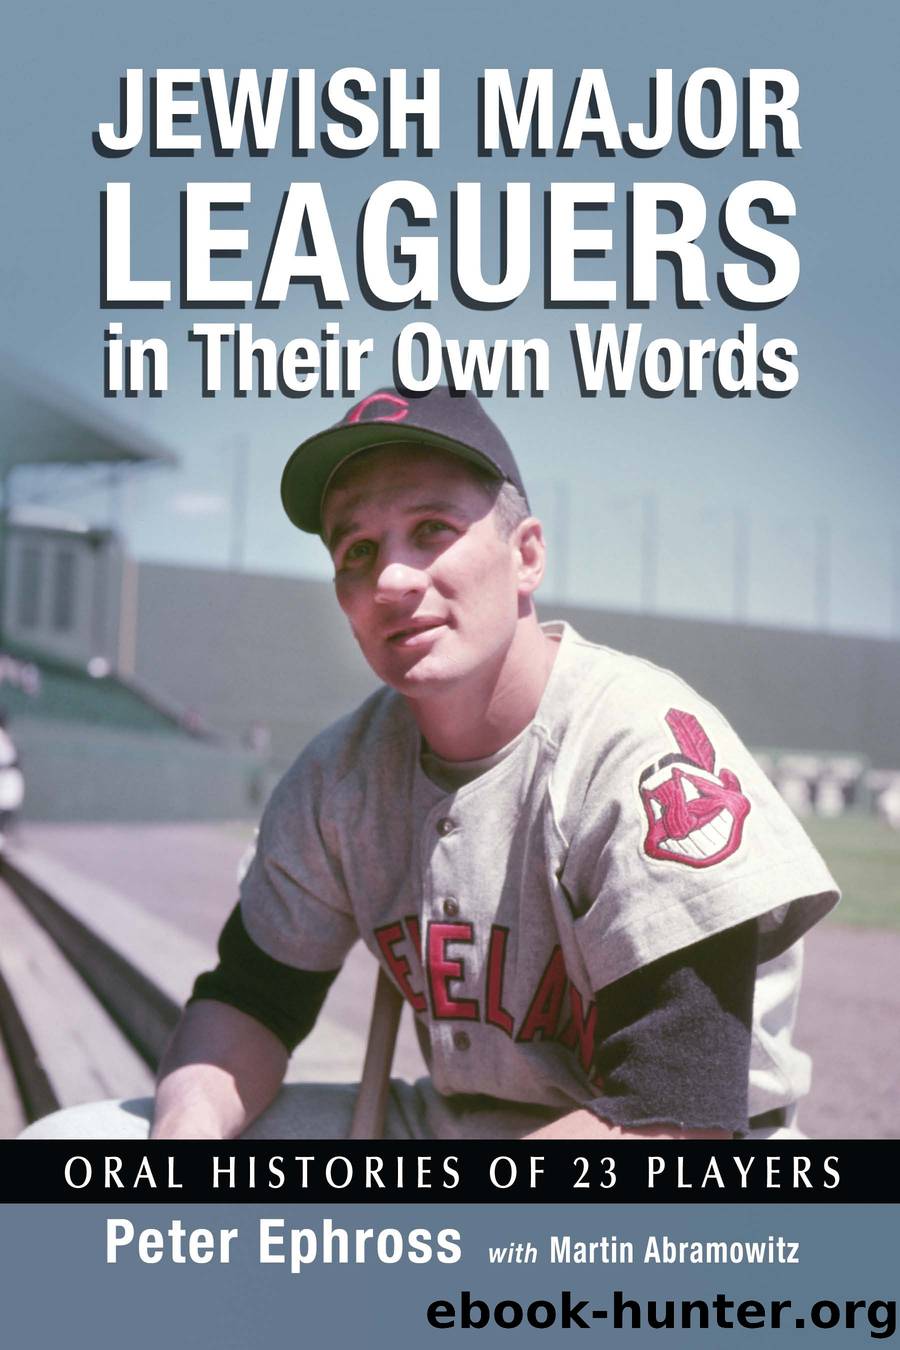 Jewish Major Leaguers in Their Own Words by Peter Ephross